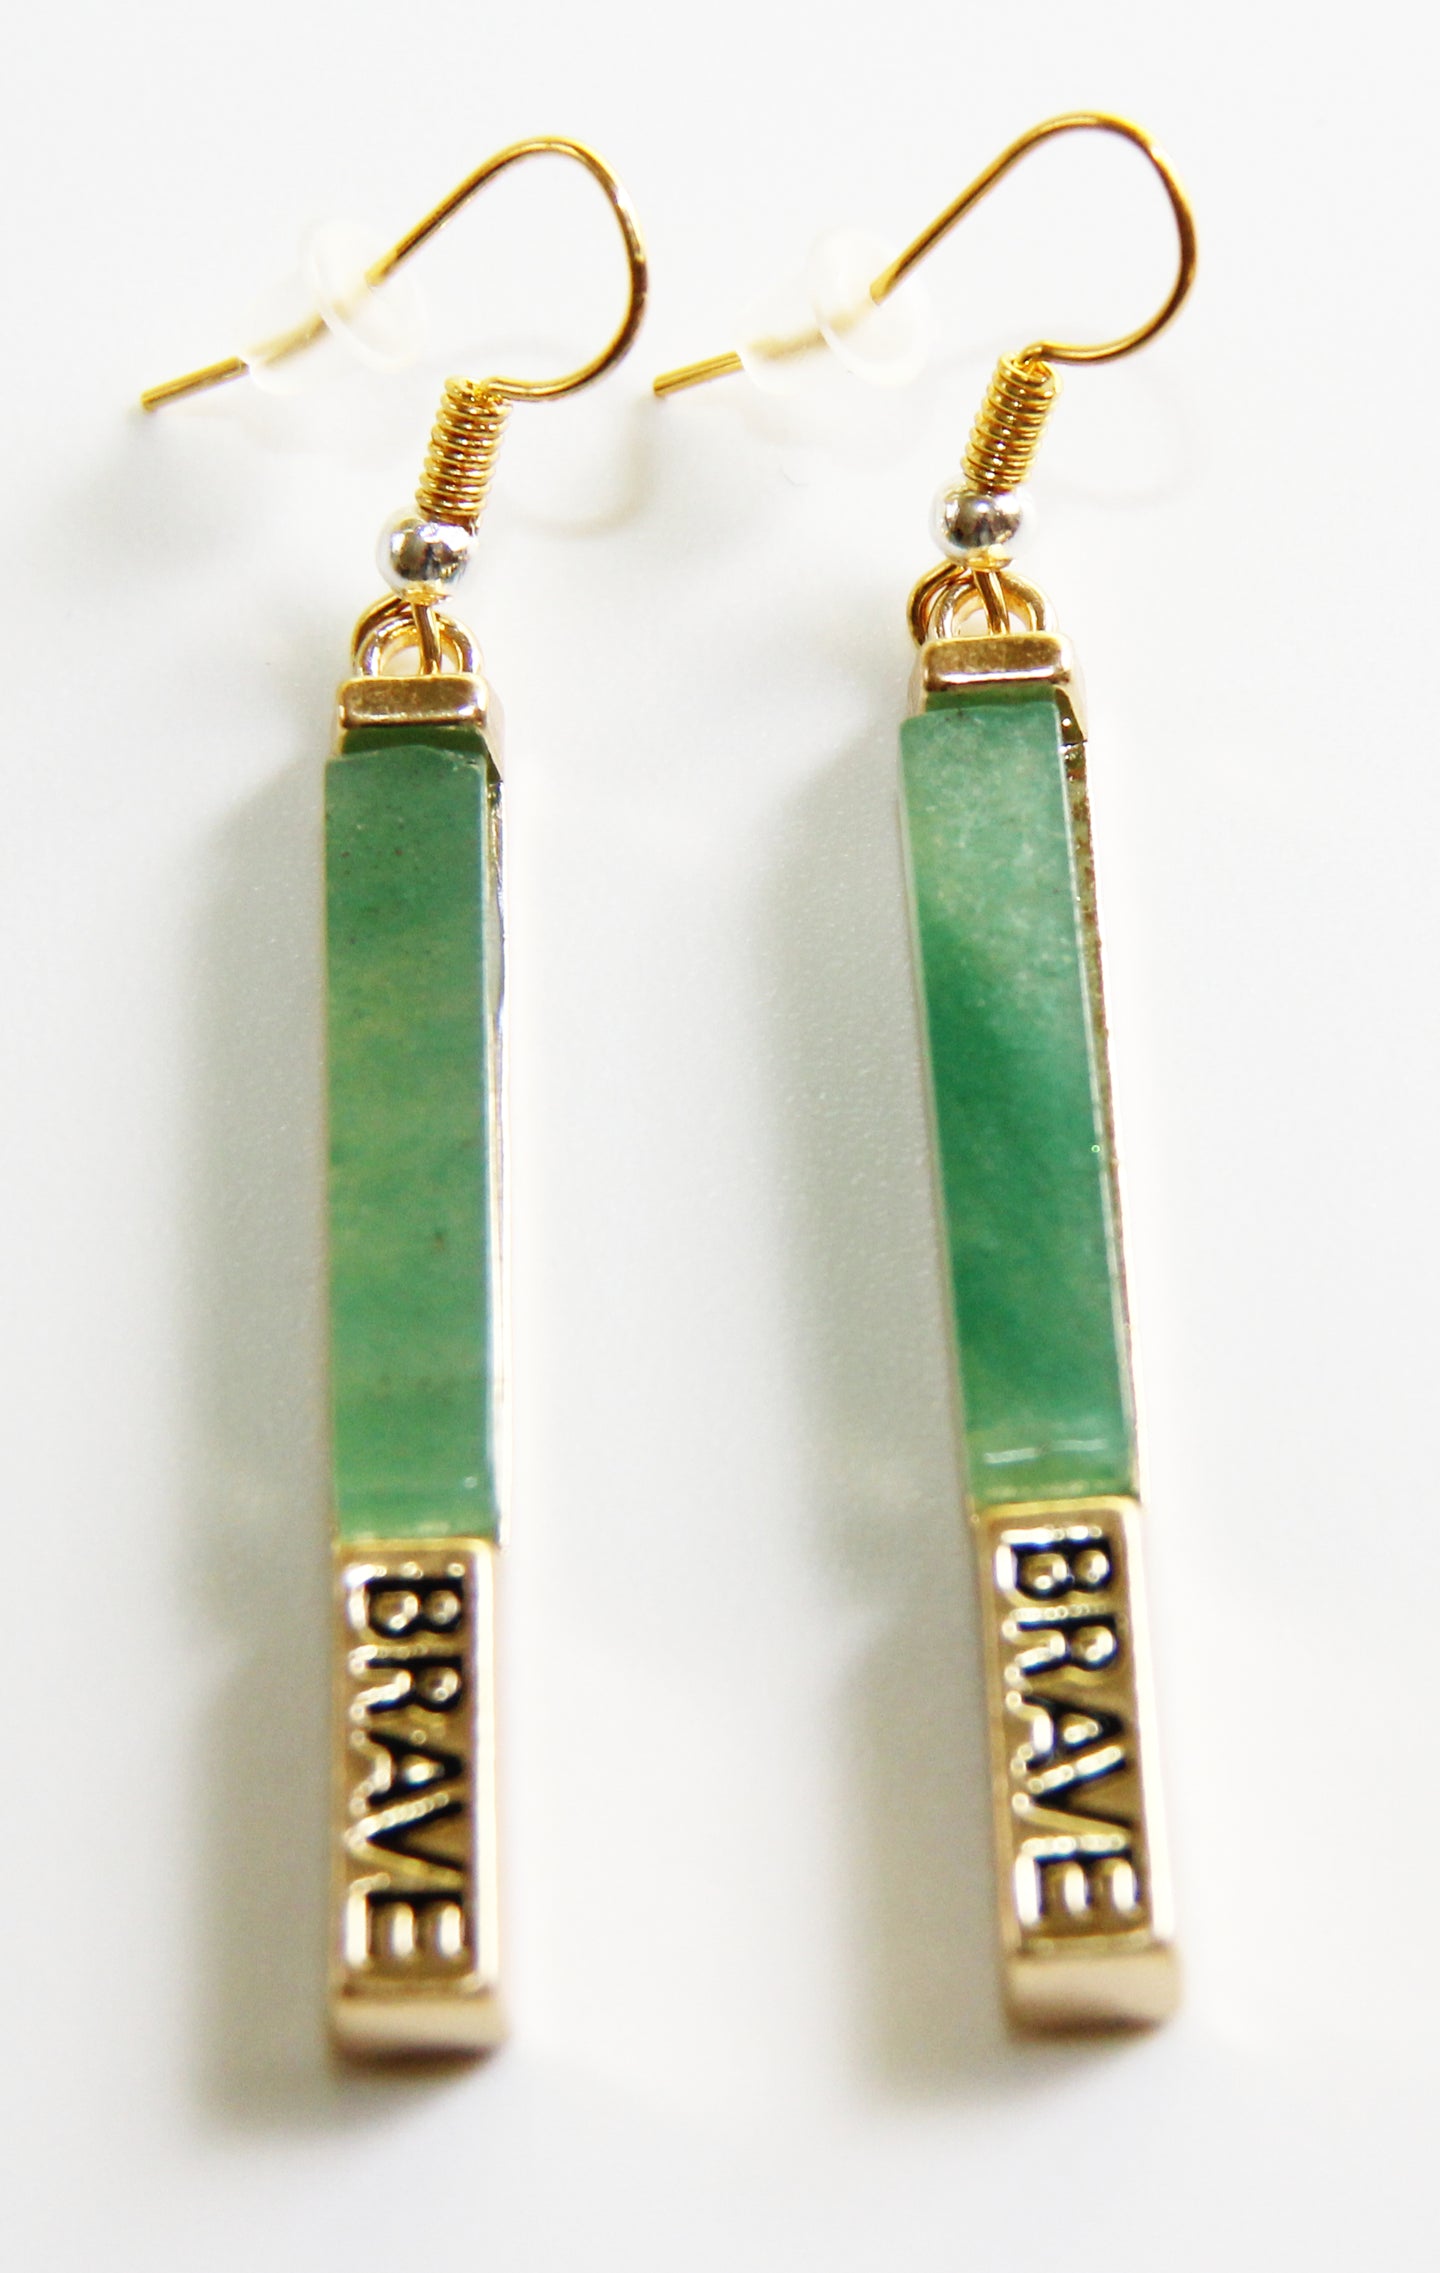 Inspiration Stone Bars With Gold- Green Aventurine- BRAVE Earrings